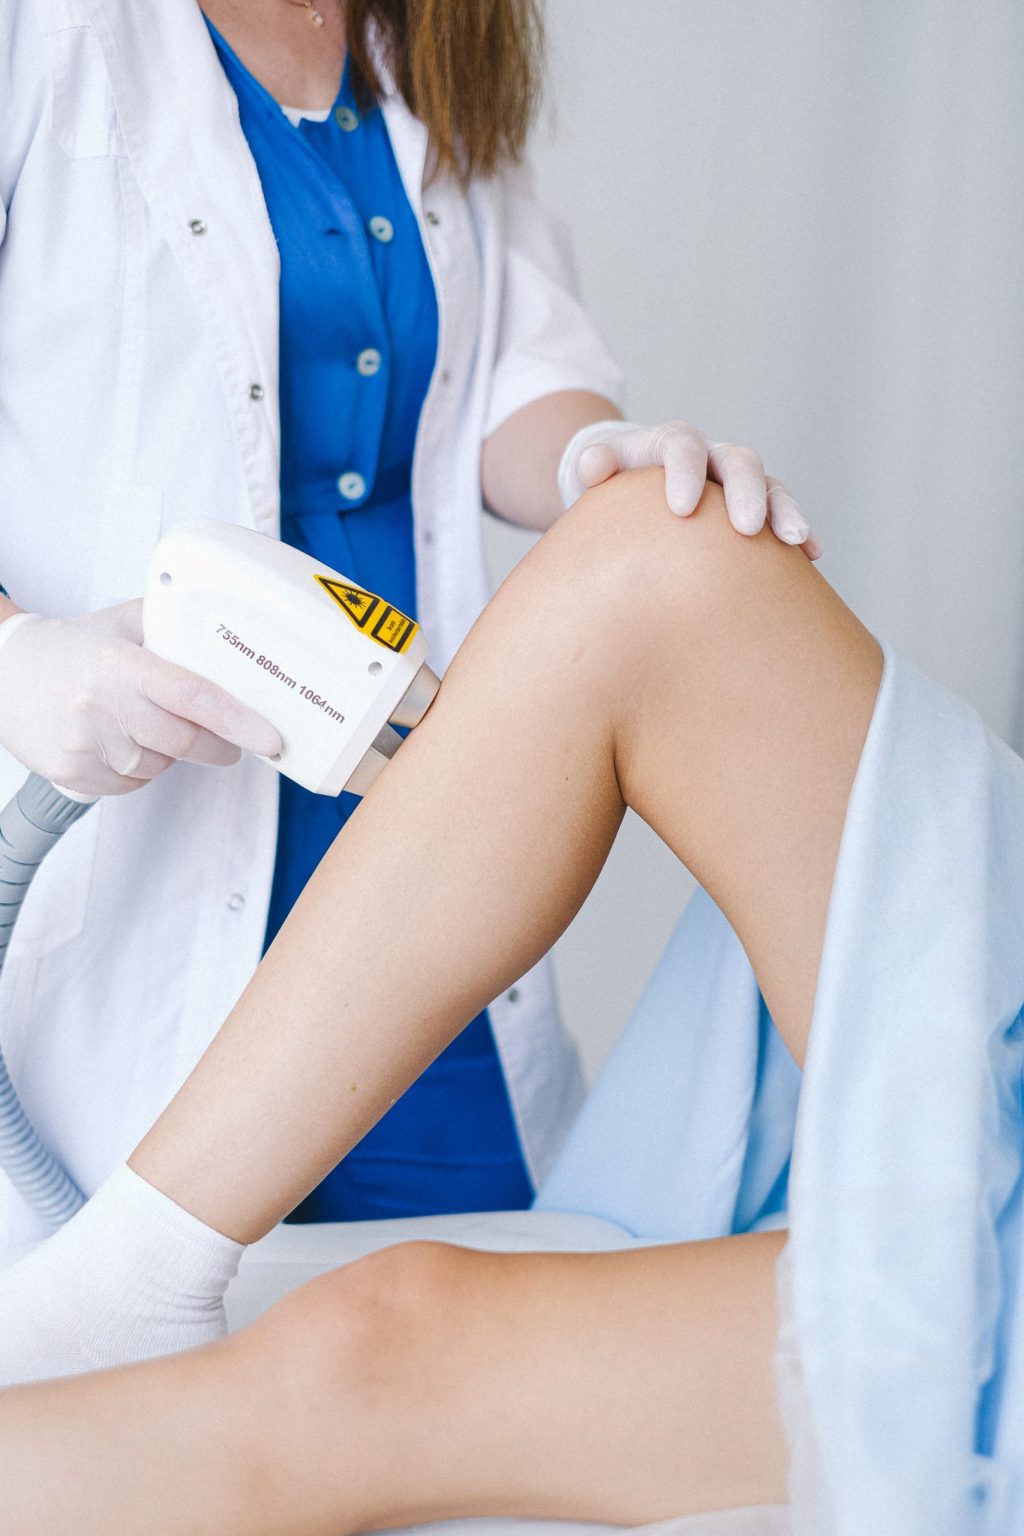 endovenous laser ablation therapy